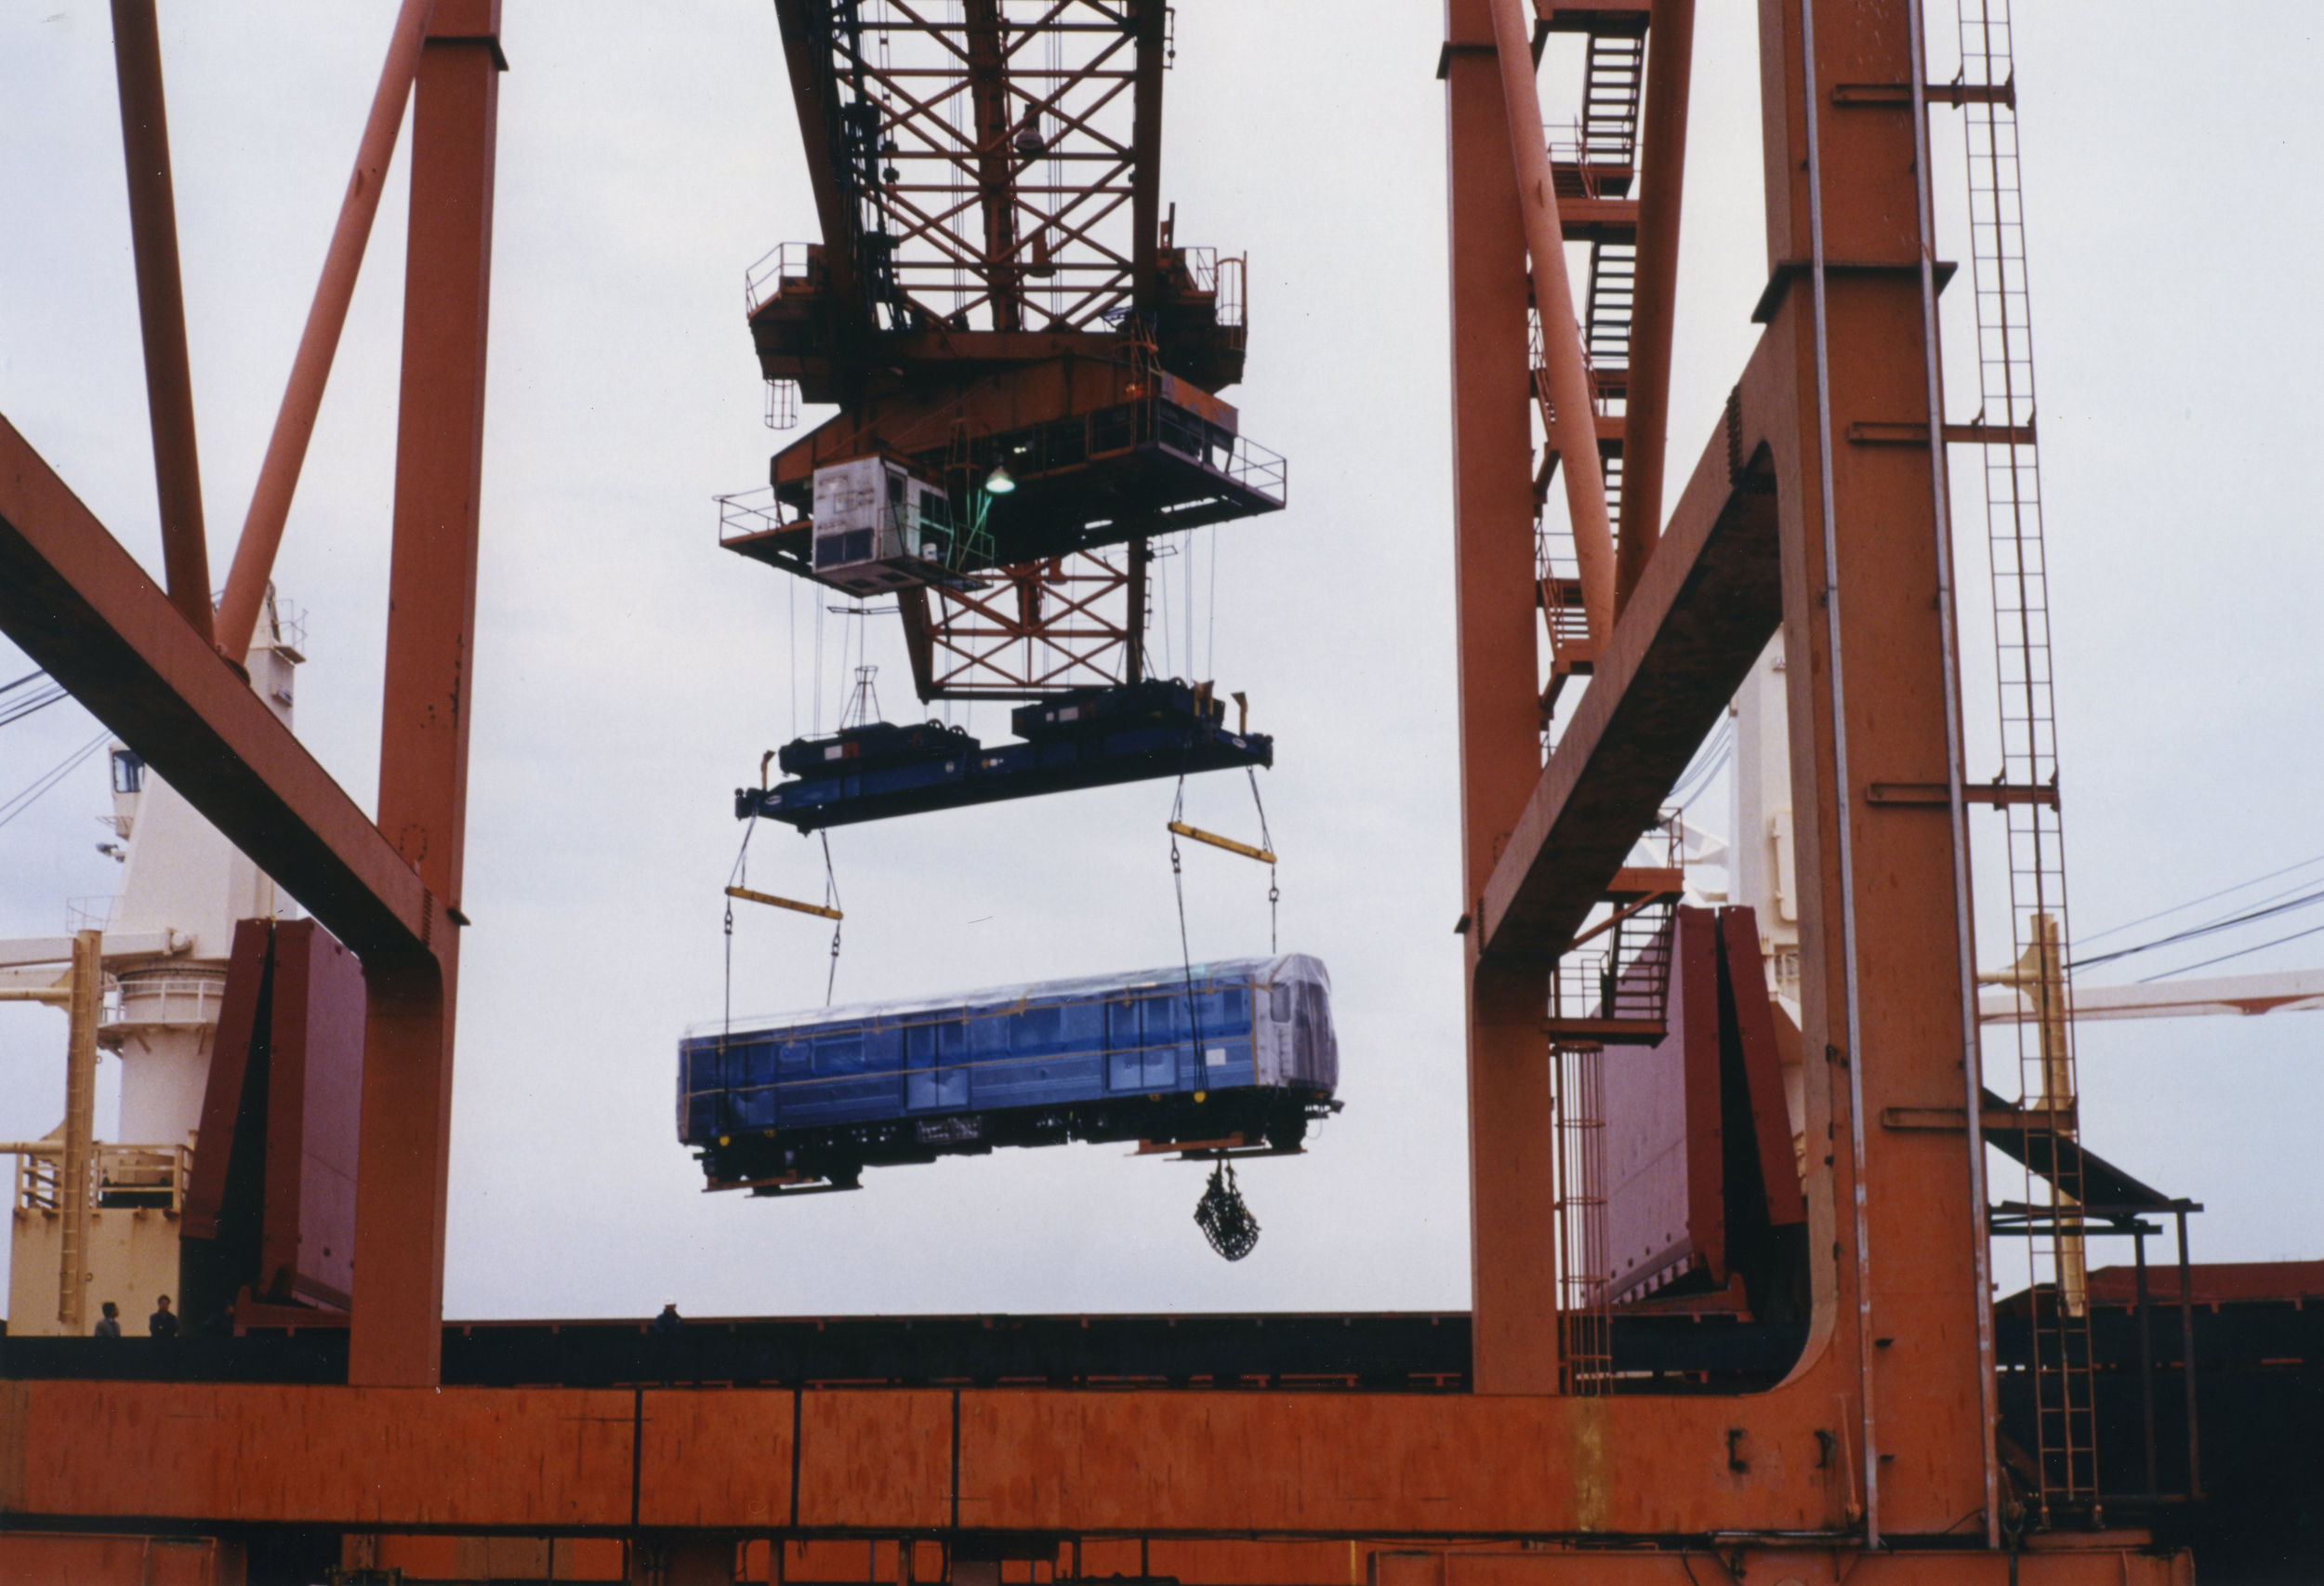 R110A "New Technology" car being lifted off a barge by a crane as it arrives in New York via ship in October 1992. These prototype cars were built as part of the New Technology Test Program, developed to test out advanced technical features which were later incorporated into subsequent models.